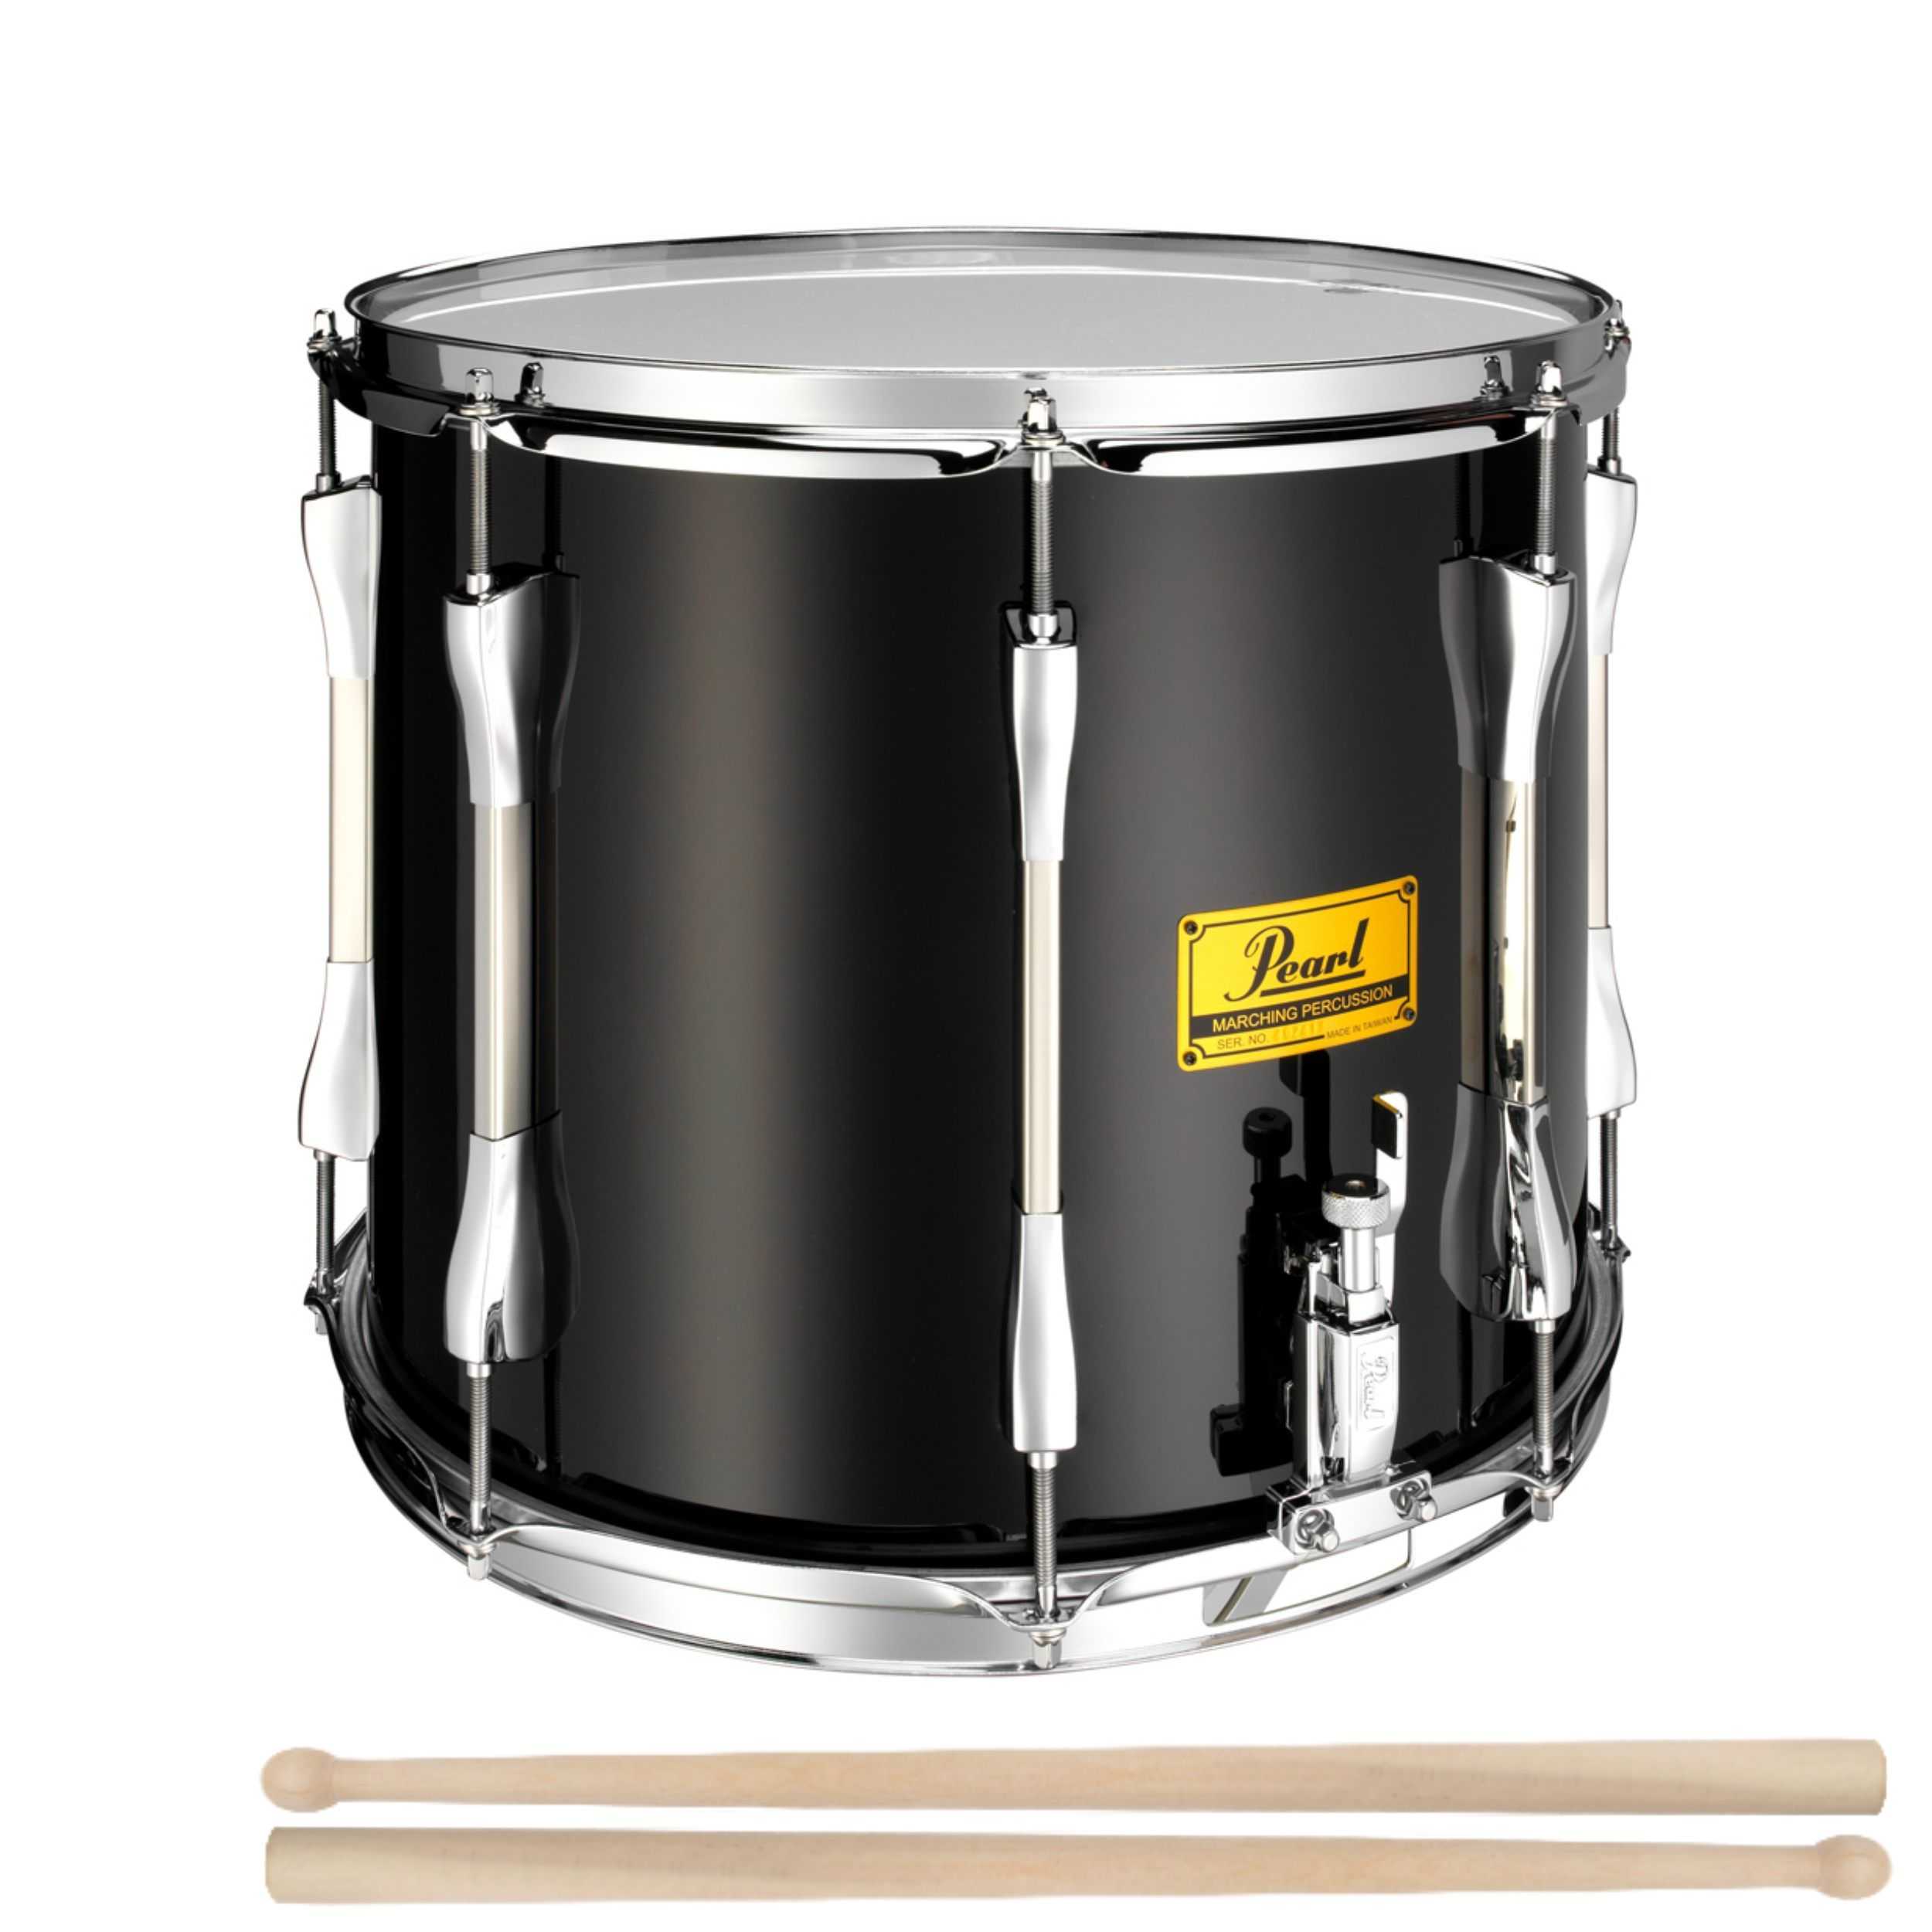 Pearl Parade Series 14x12" Marching Snare Drum Black - FREE STICKS